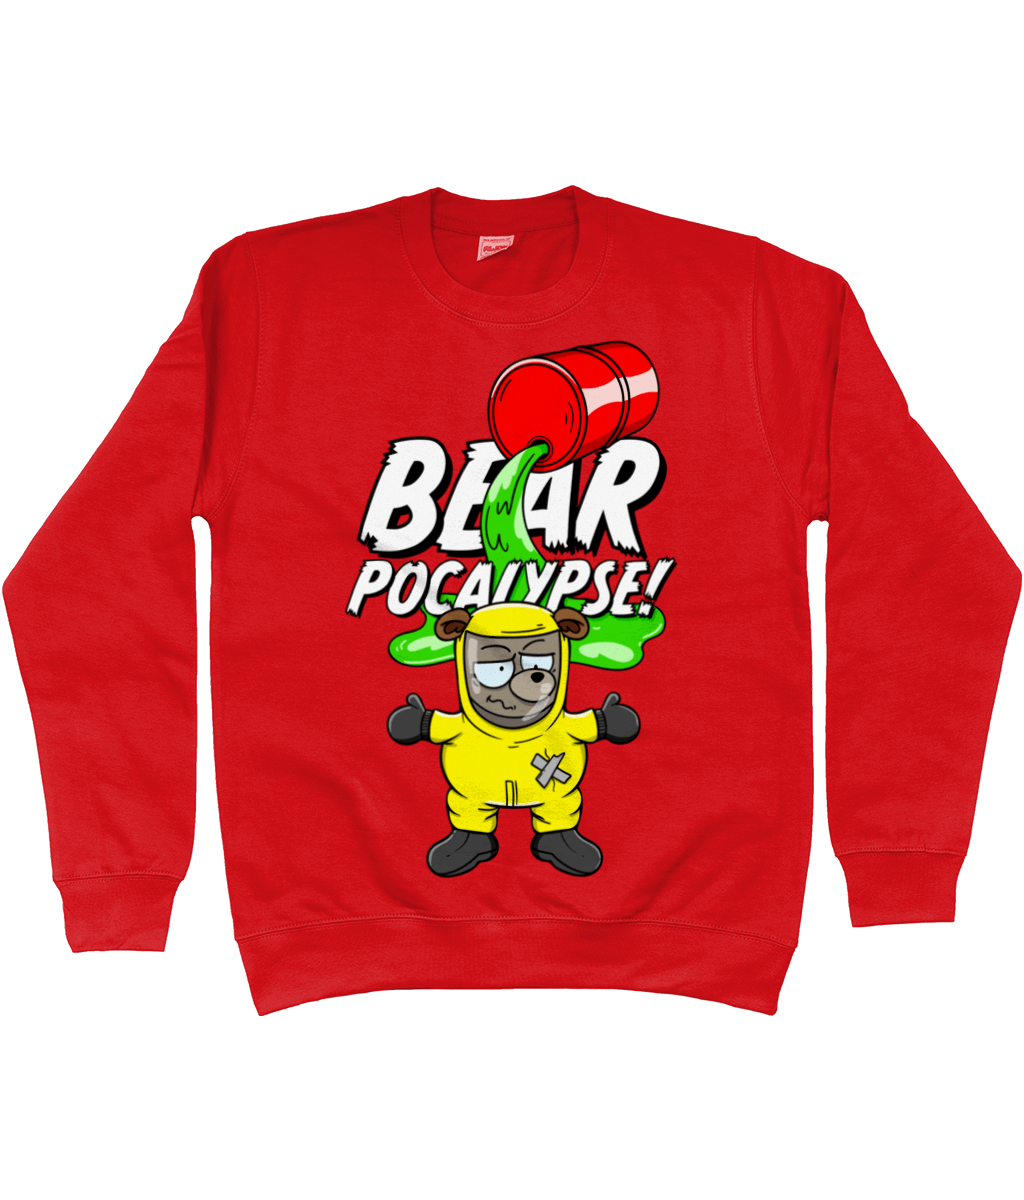 Red Sweatshirt with white bold text reading Bearpocalypse! with a red barrel spilling toxic waste and a bear wearing a yellow hazmat suit